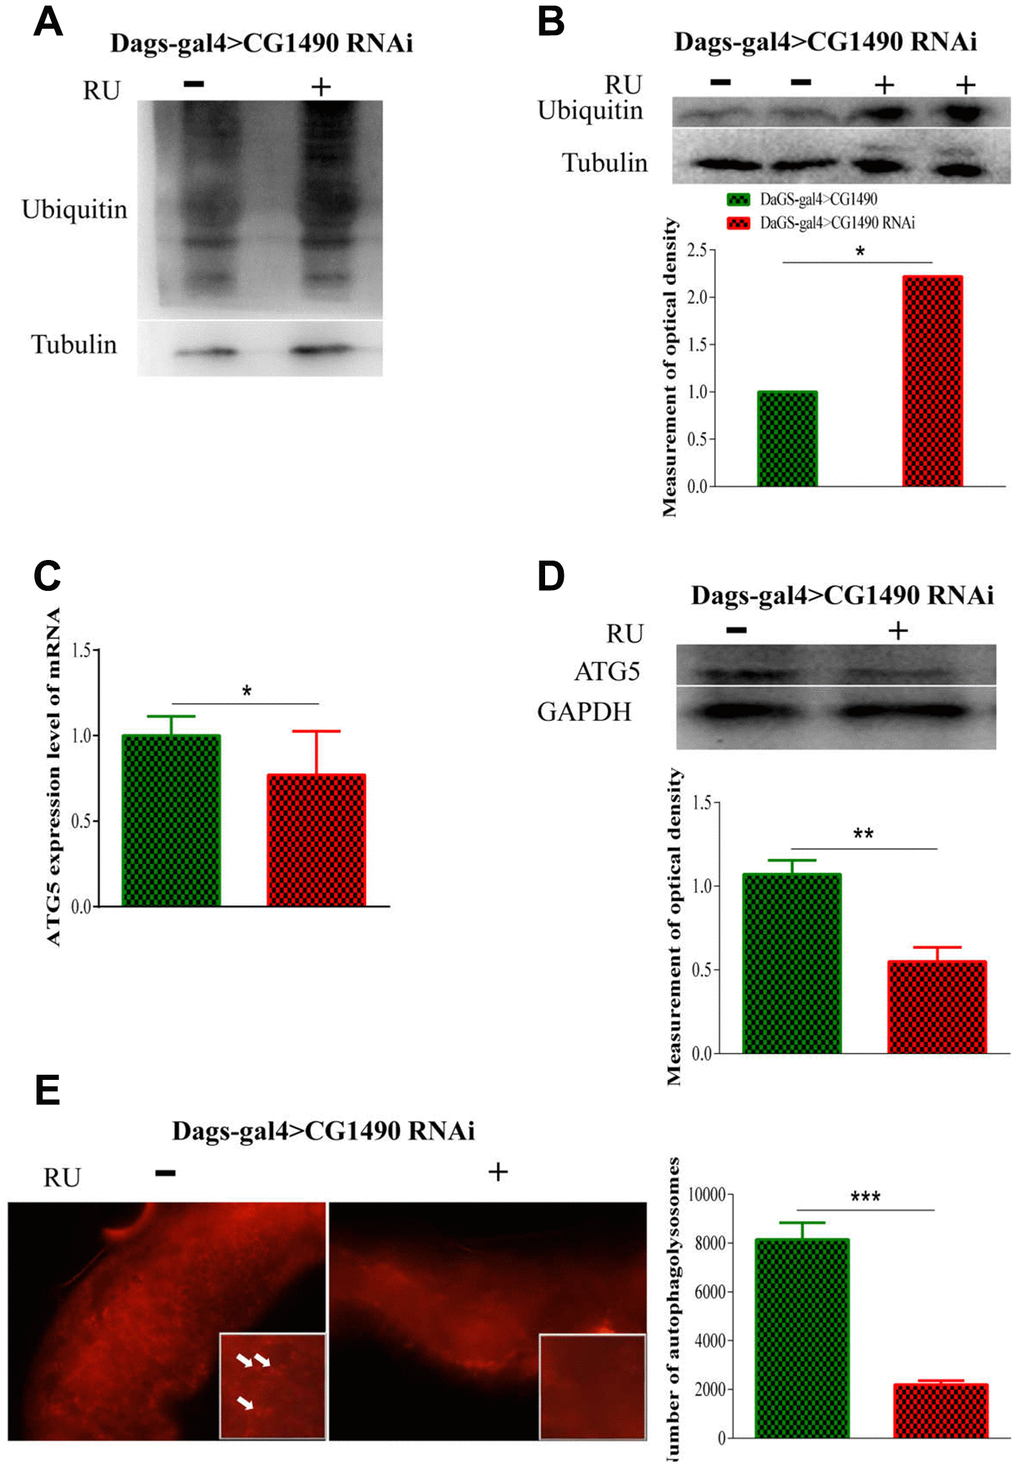 Effect of dusp7 in Drosophila on the control of protein in vivo. (A) The protein ubiquitination level after dusp7 knockdown in Drosophila. (B) The ubiquitination level after dusp7 knockdown in Drosophila (* p. (C) Autophagy-related gene expression after dusp7 knockdown in Drosophila (* pD) Autophagy-related protein expression after dusp7 knockdown in Drosophila (** pE) The effect of autolysosomes after dusp7 knockdown in Drosophila (*** p: hybridization; + means adding Ru to induce expression; - means no adding RU).